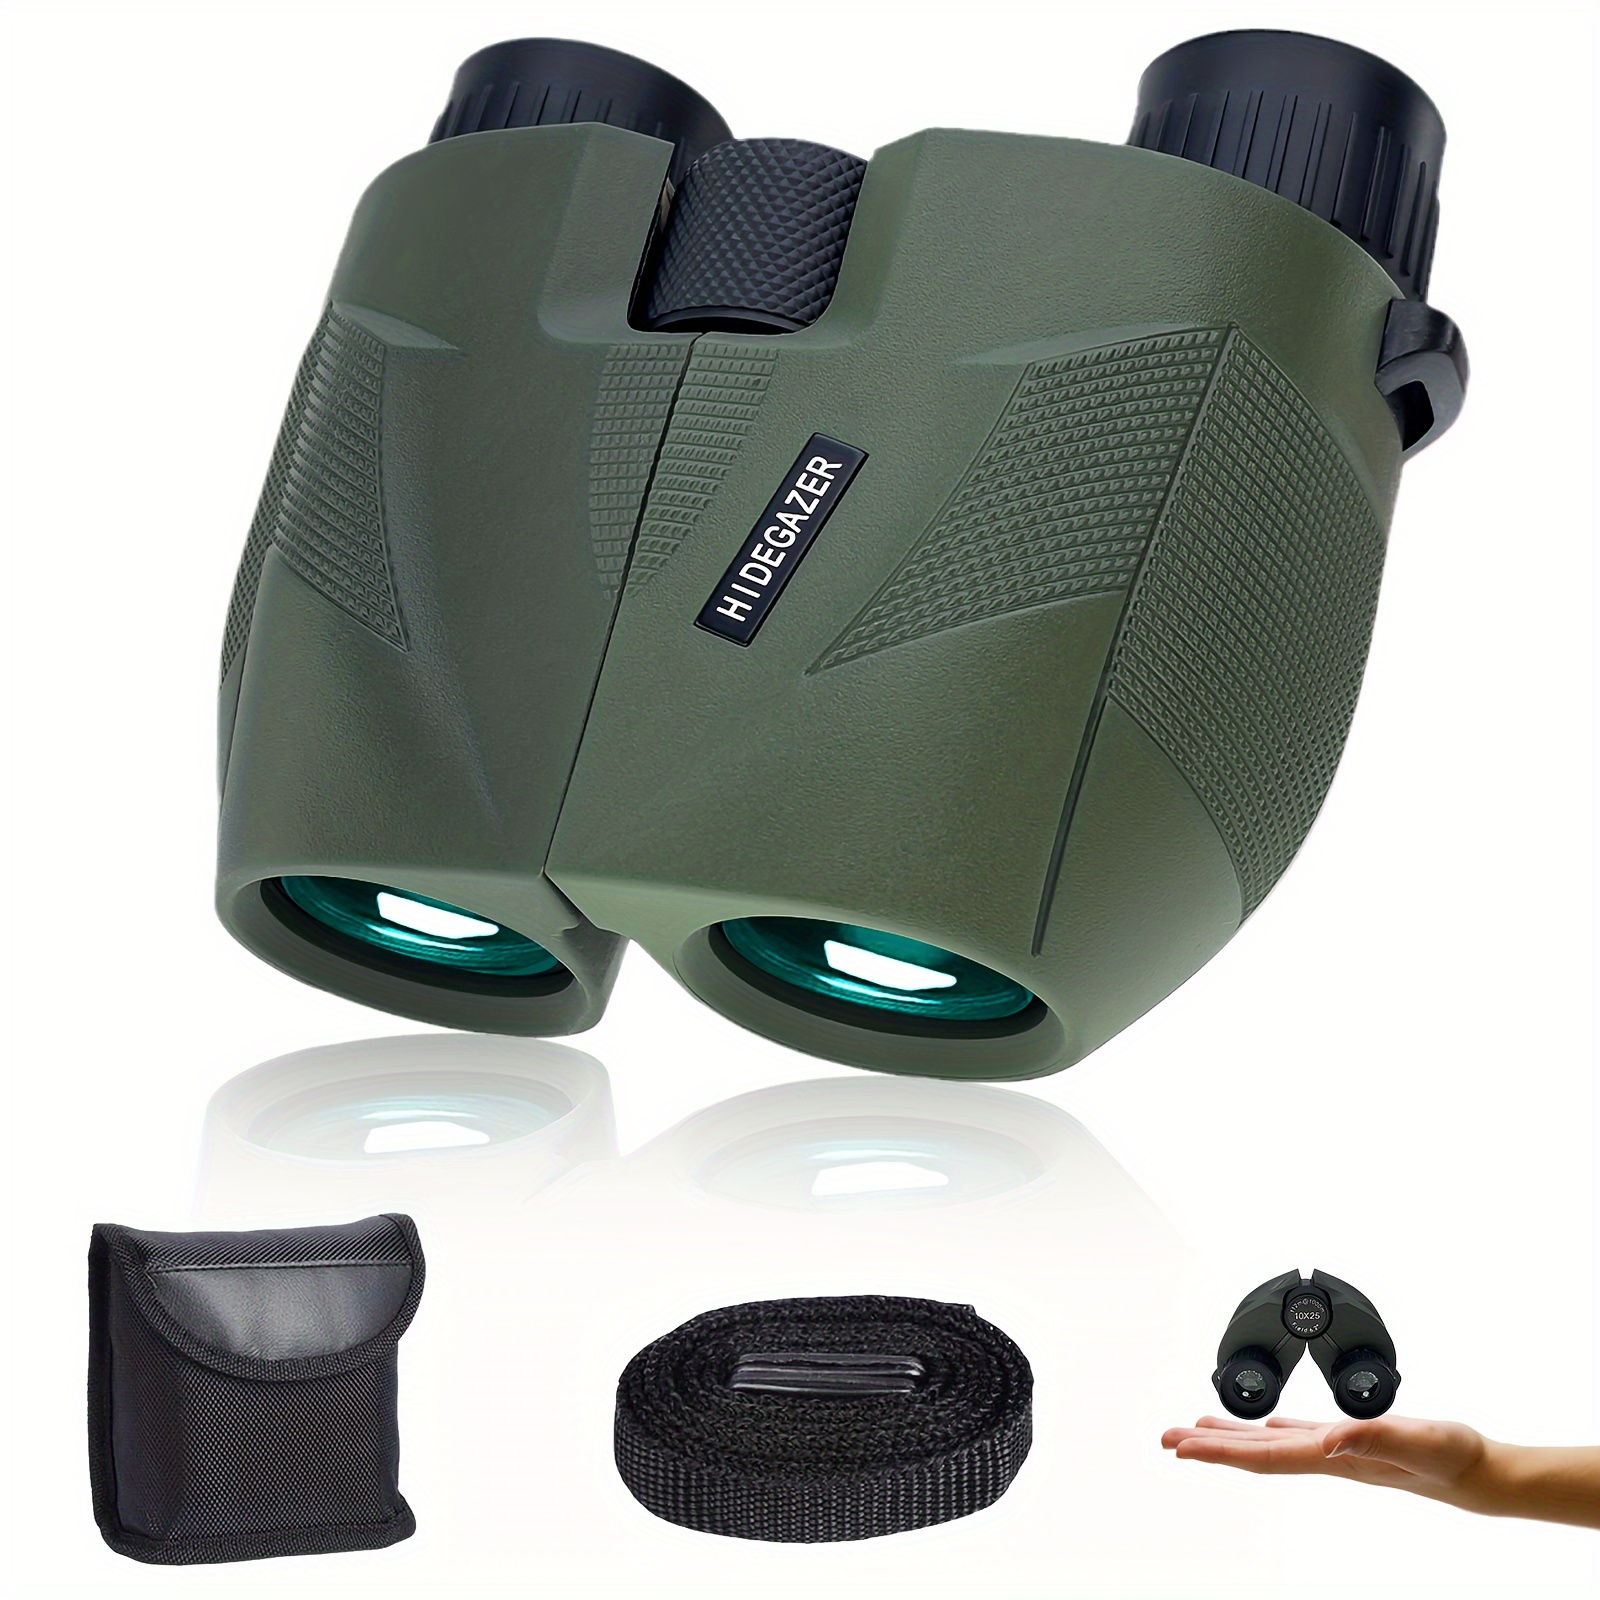 

Hidegazer High Powered Binoculars For Adults, 10x25 Compact Binoculars For Bird Watching - Easy Focus Binoculars With Large Eyepiece For Hunting, Travel, Hiking And Sport Games (olive)